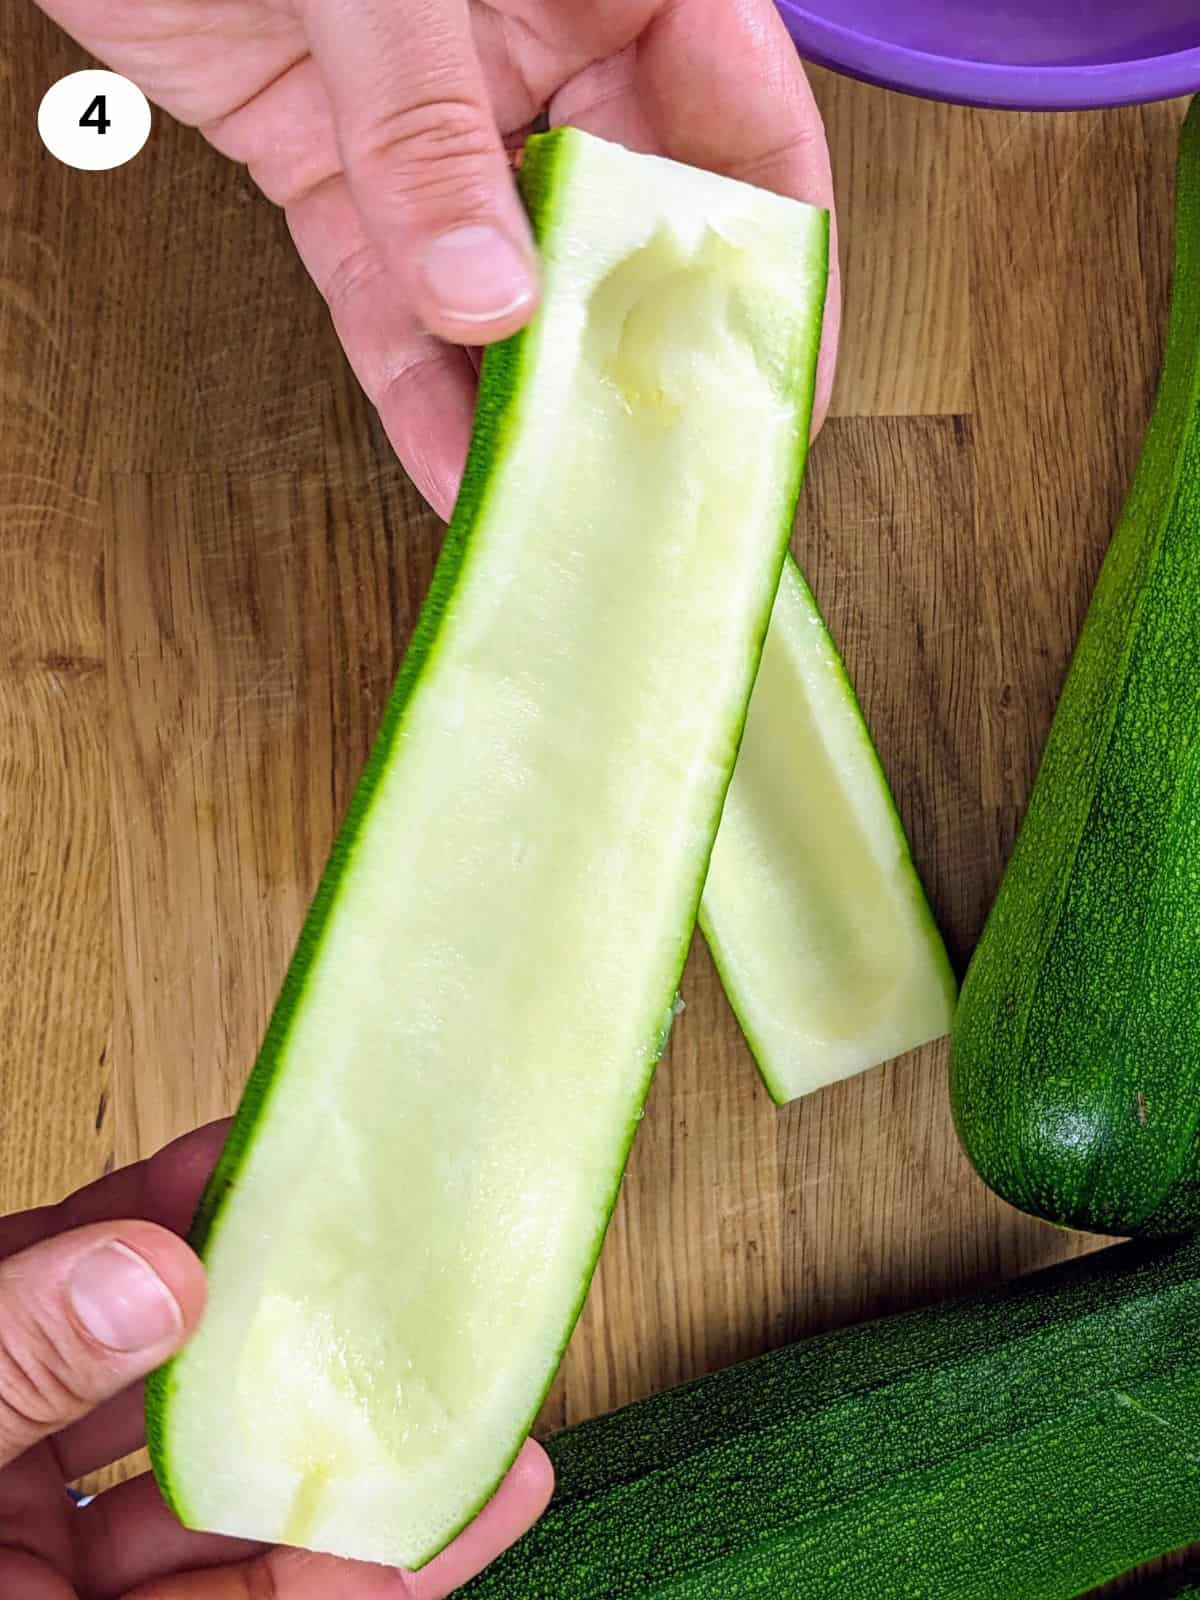 Removing the flesh from the zucchini.